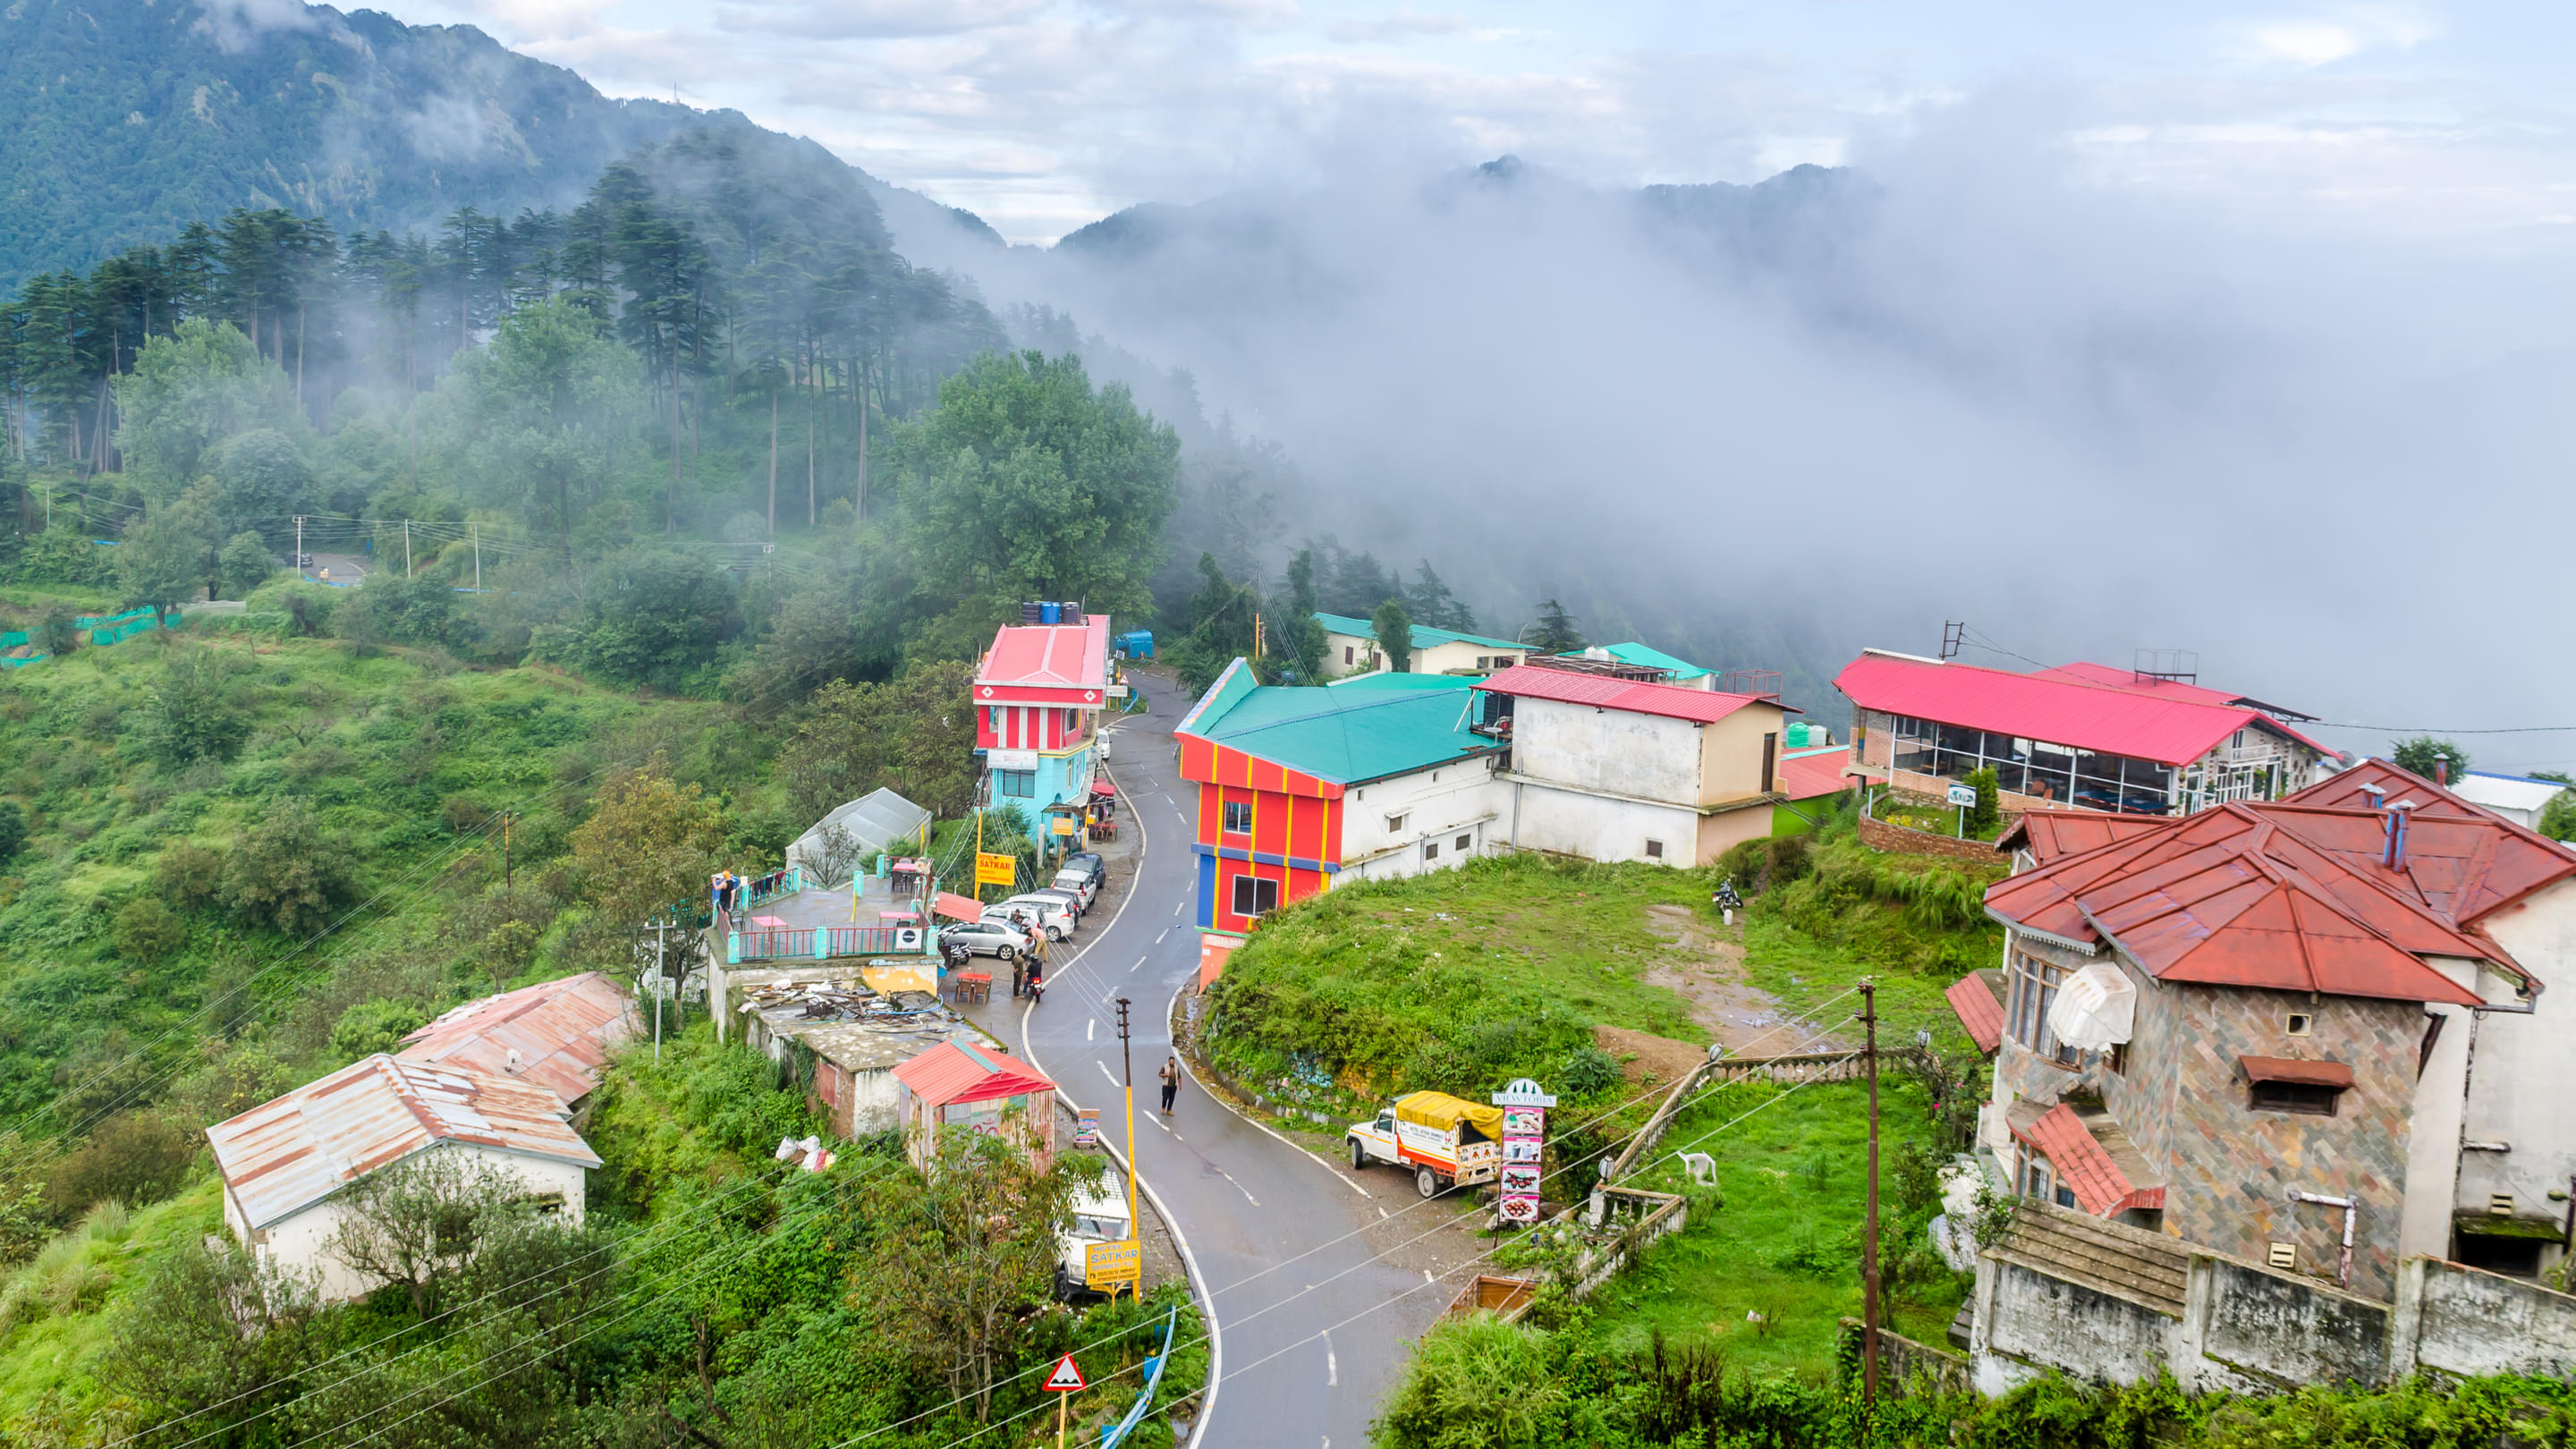 Dhanaulti Packages from Mangalore | Get Upto 40% Off